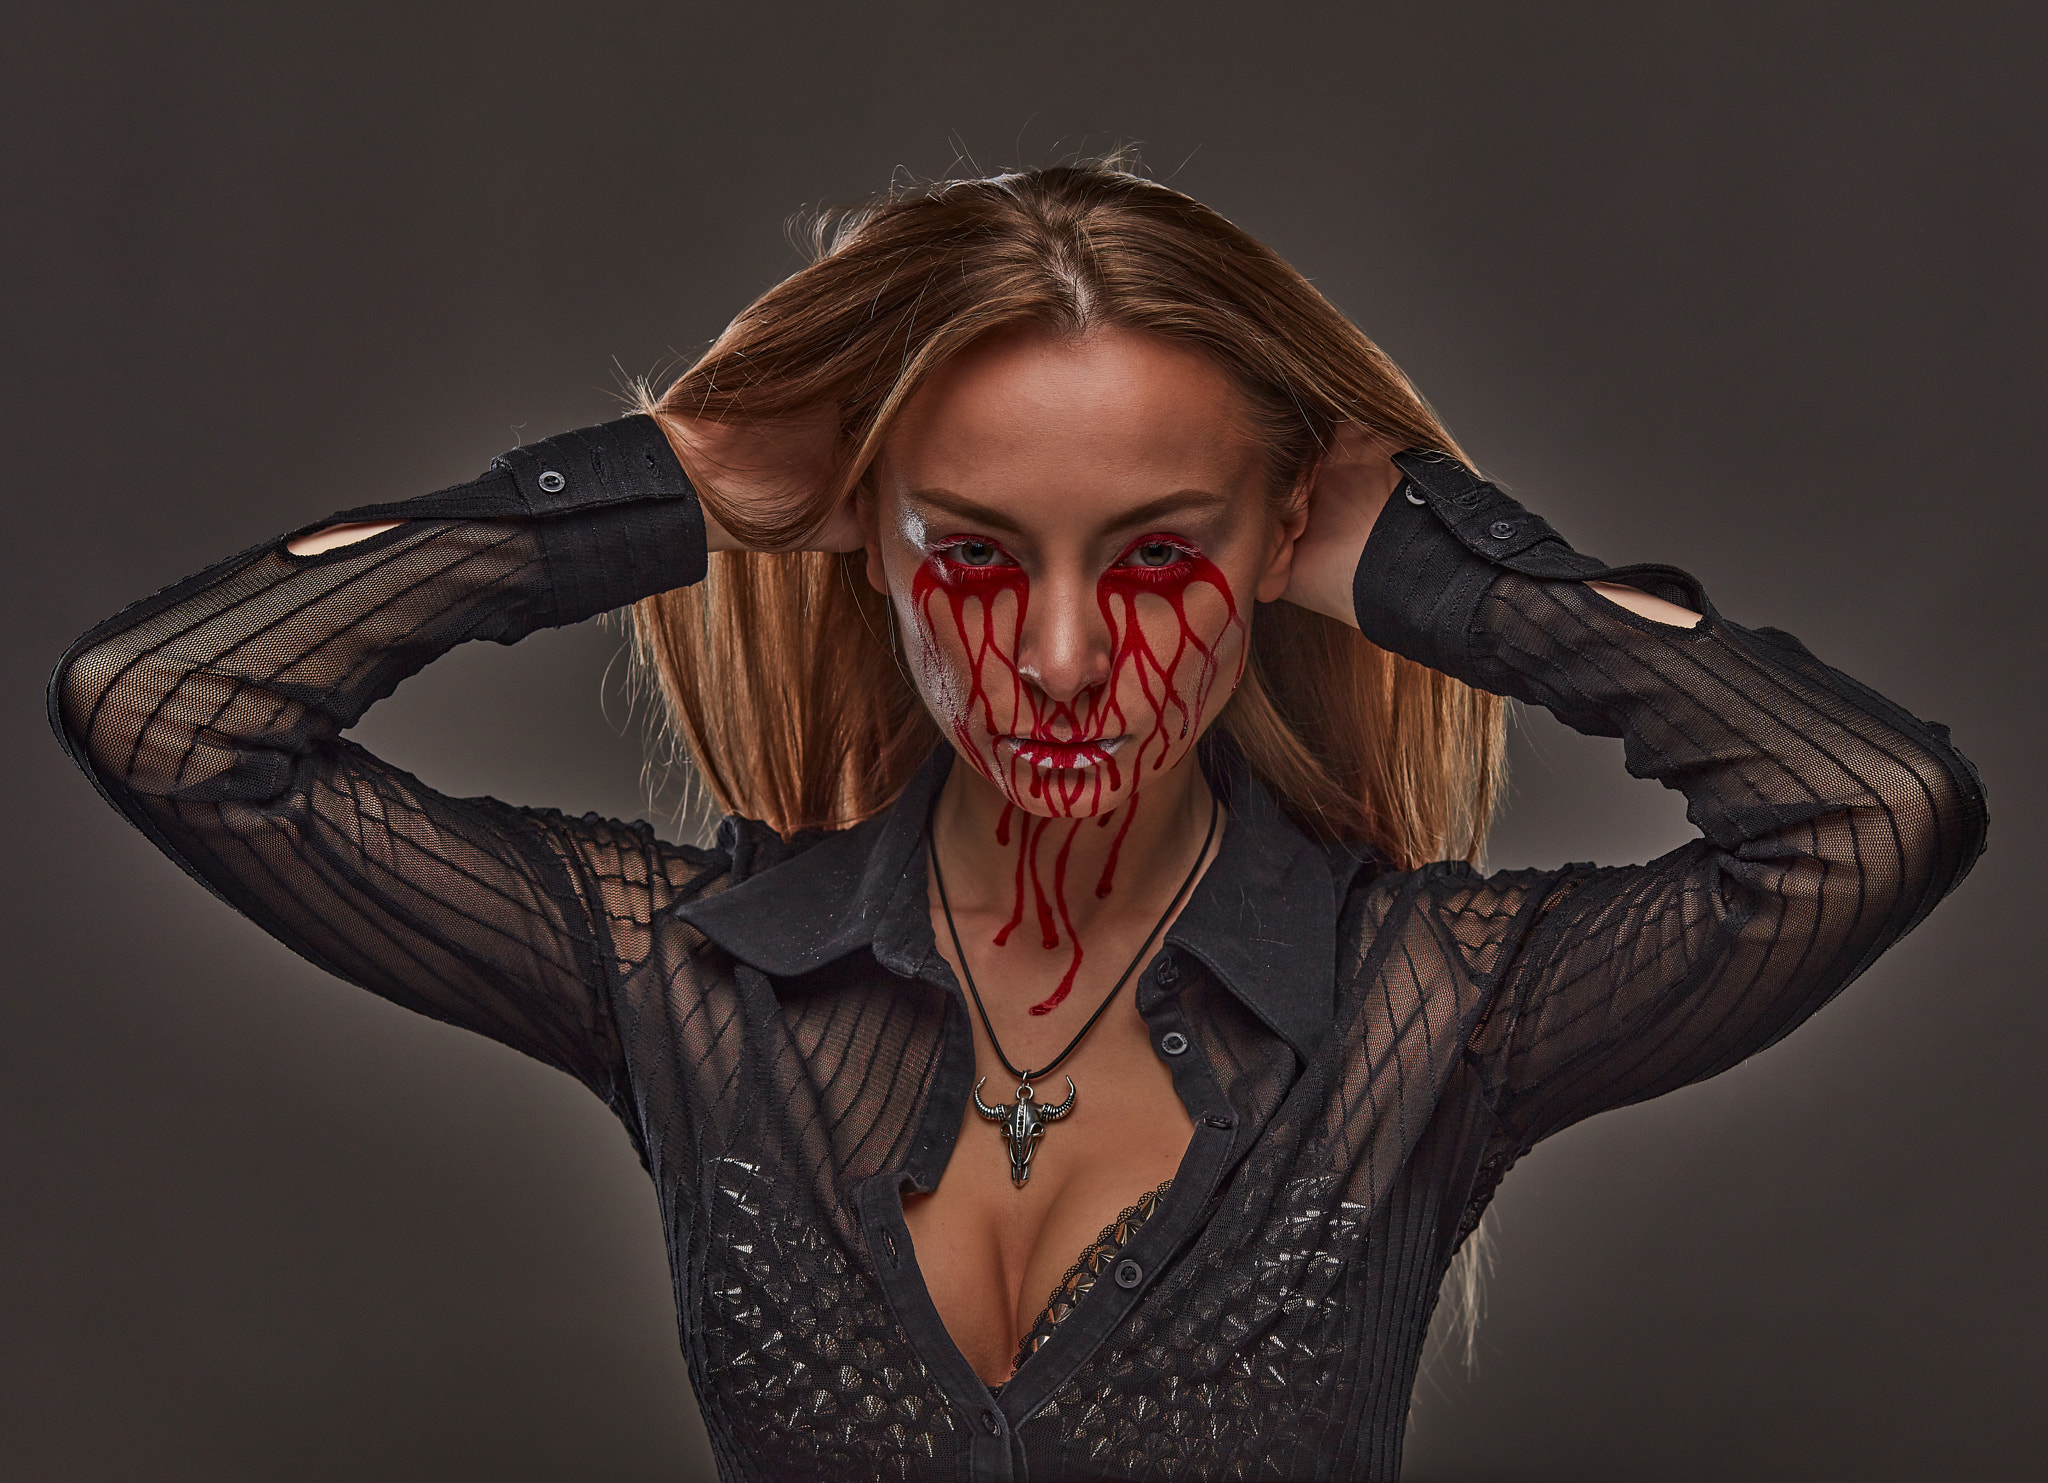 People 2048x1483 Bleeding Eyes face women women indoors model frontal view spikes face paint